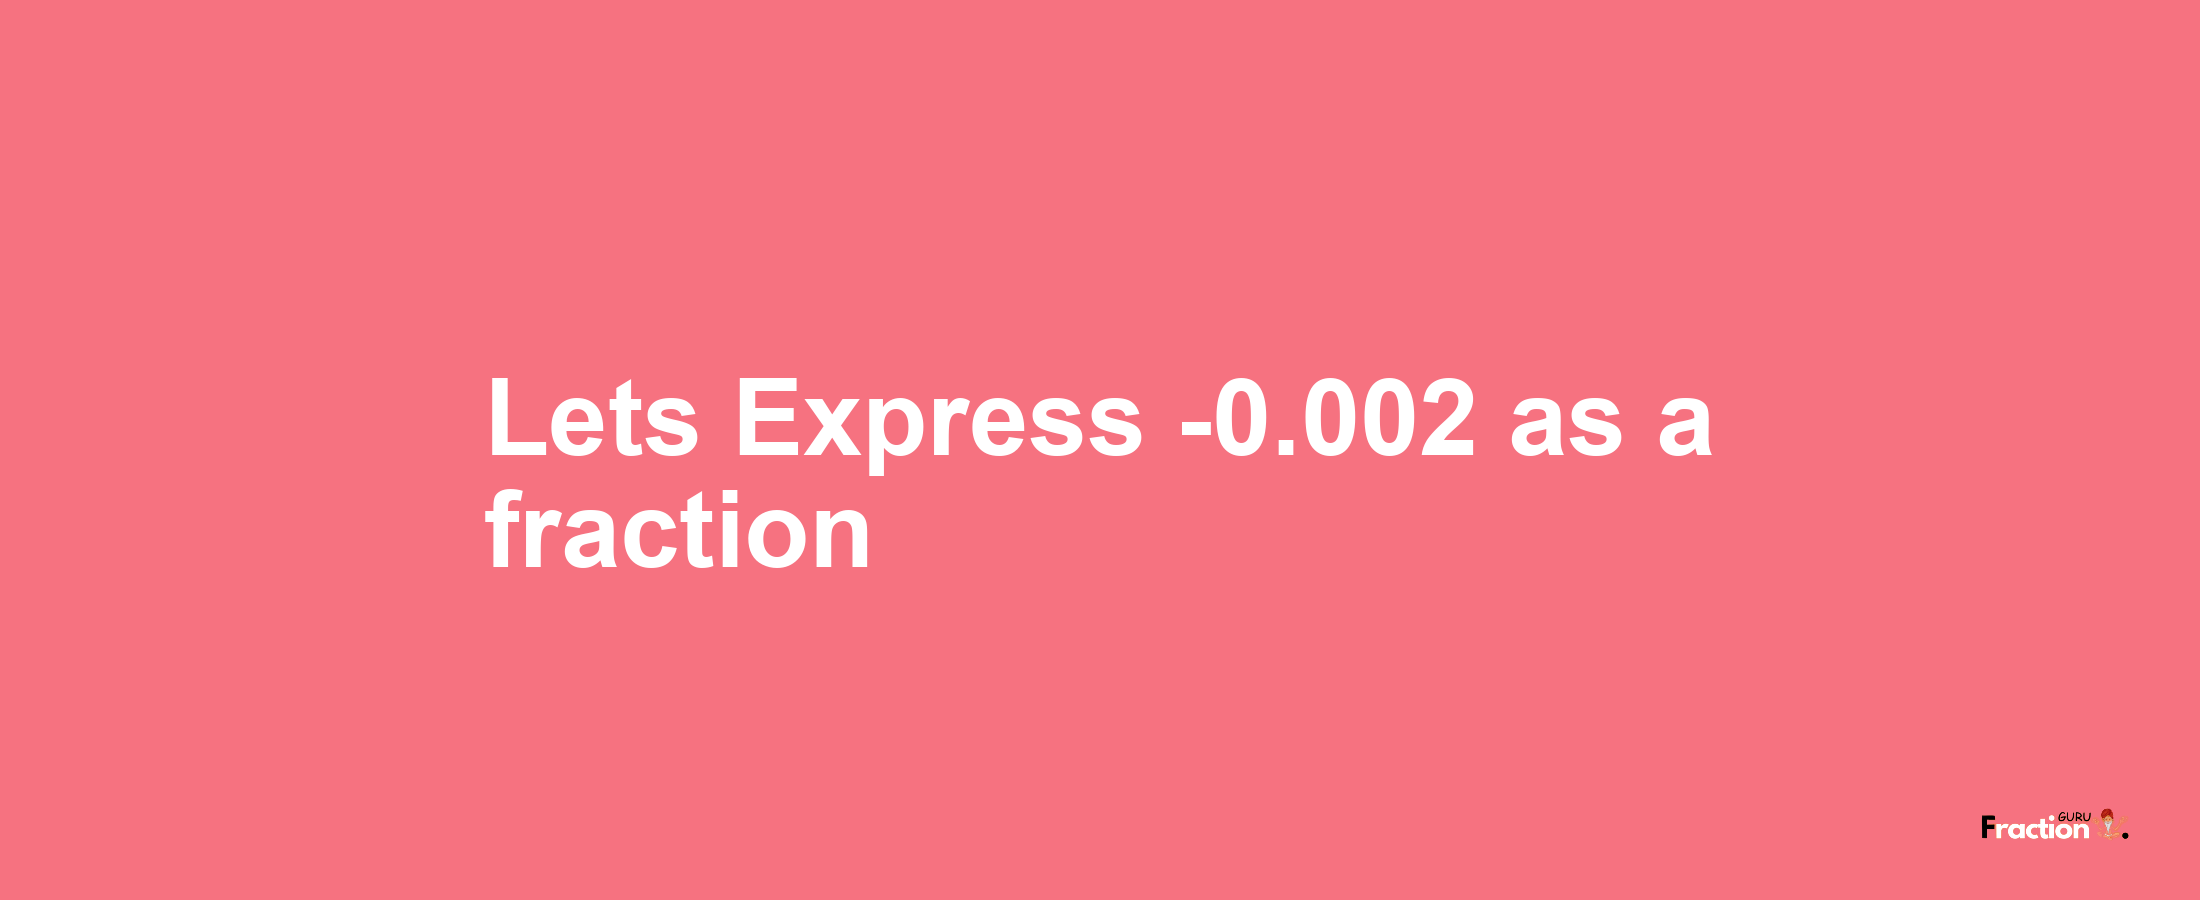 Lets Express -0.002 as afraction